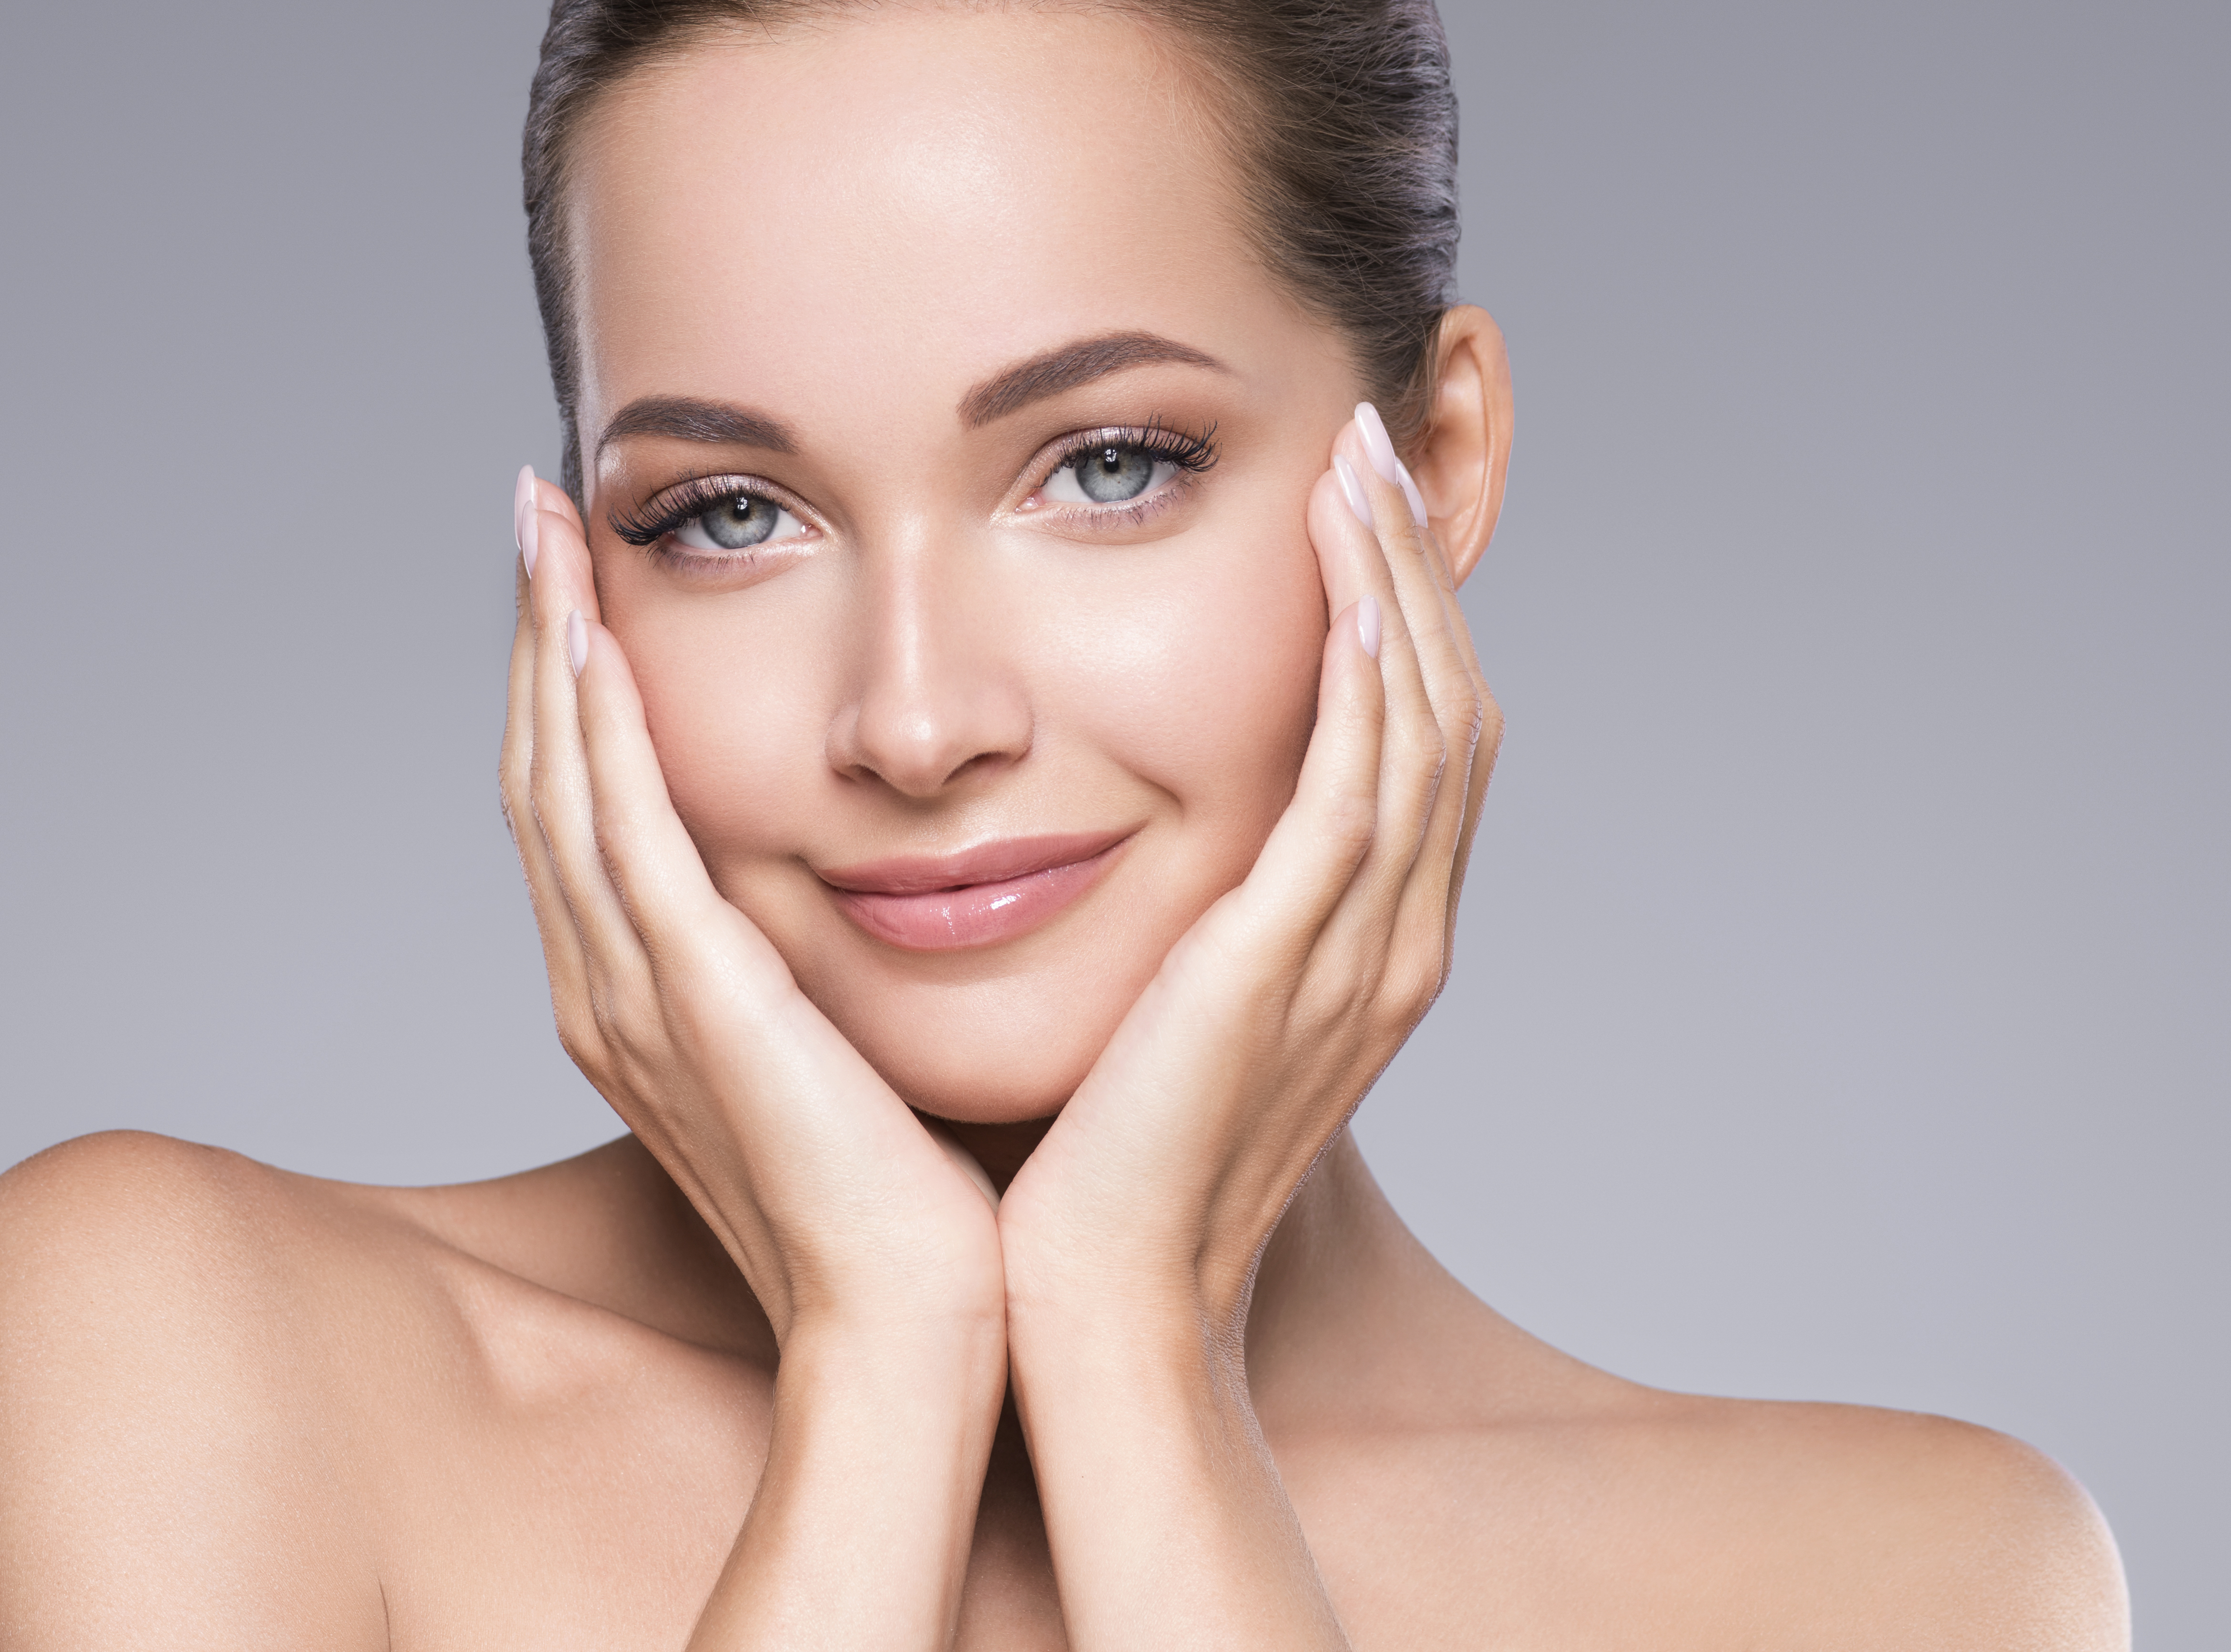 facelift, youth, face, cosmetic surgery